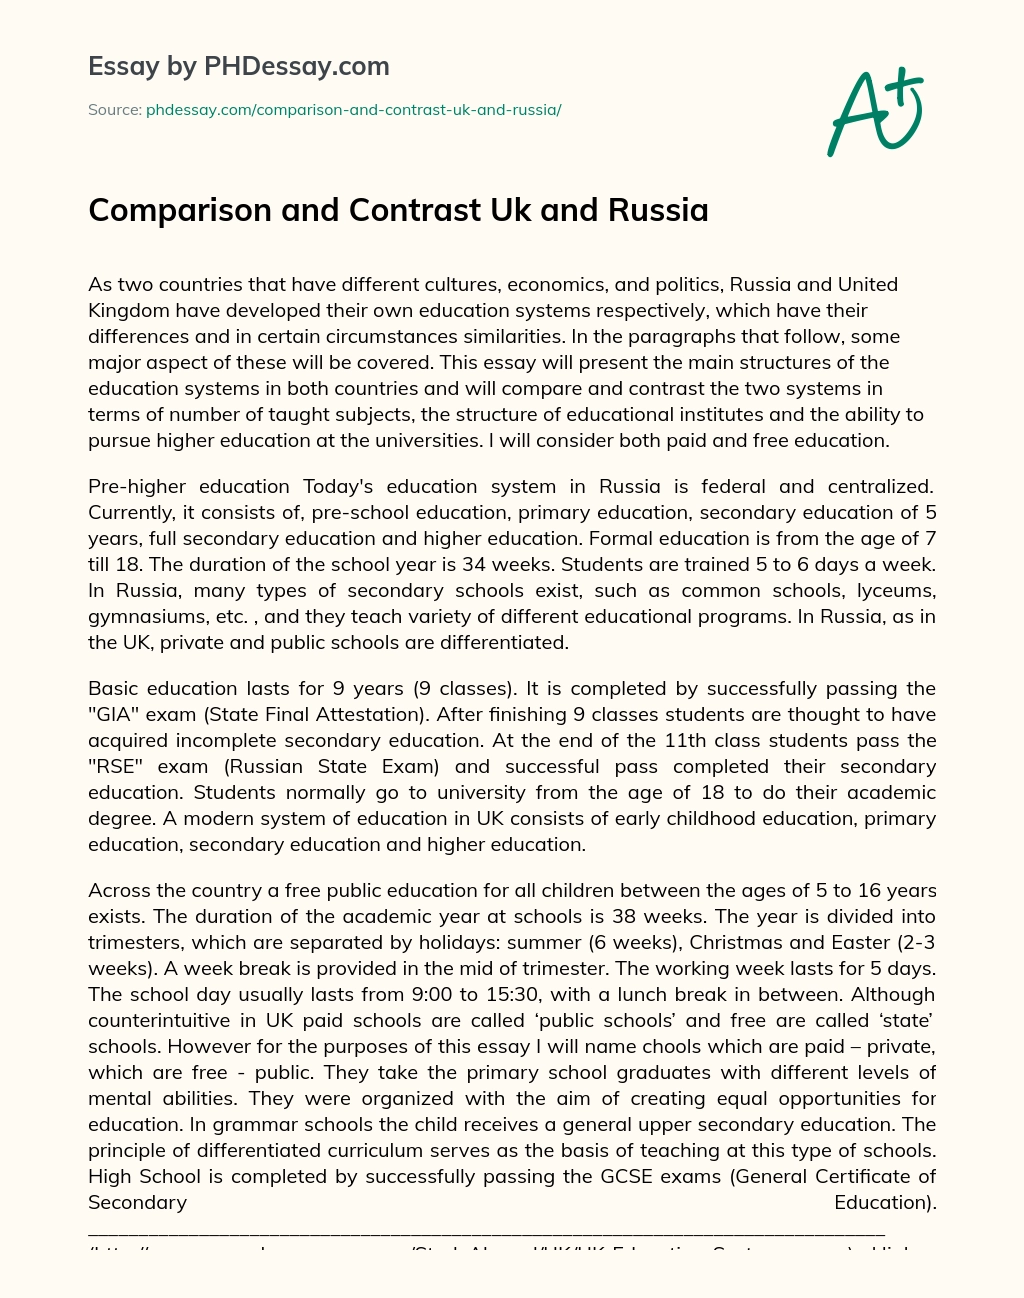 Comparison and Contrast Uk and Russia essay